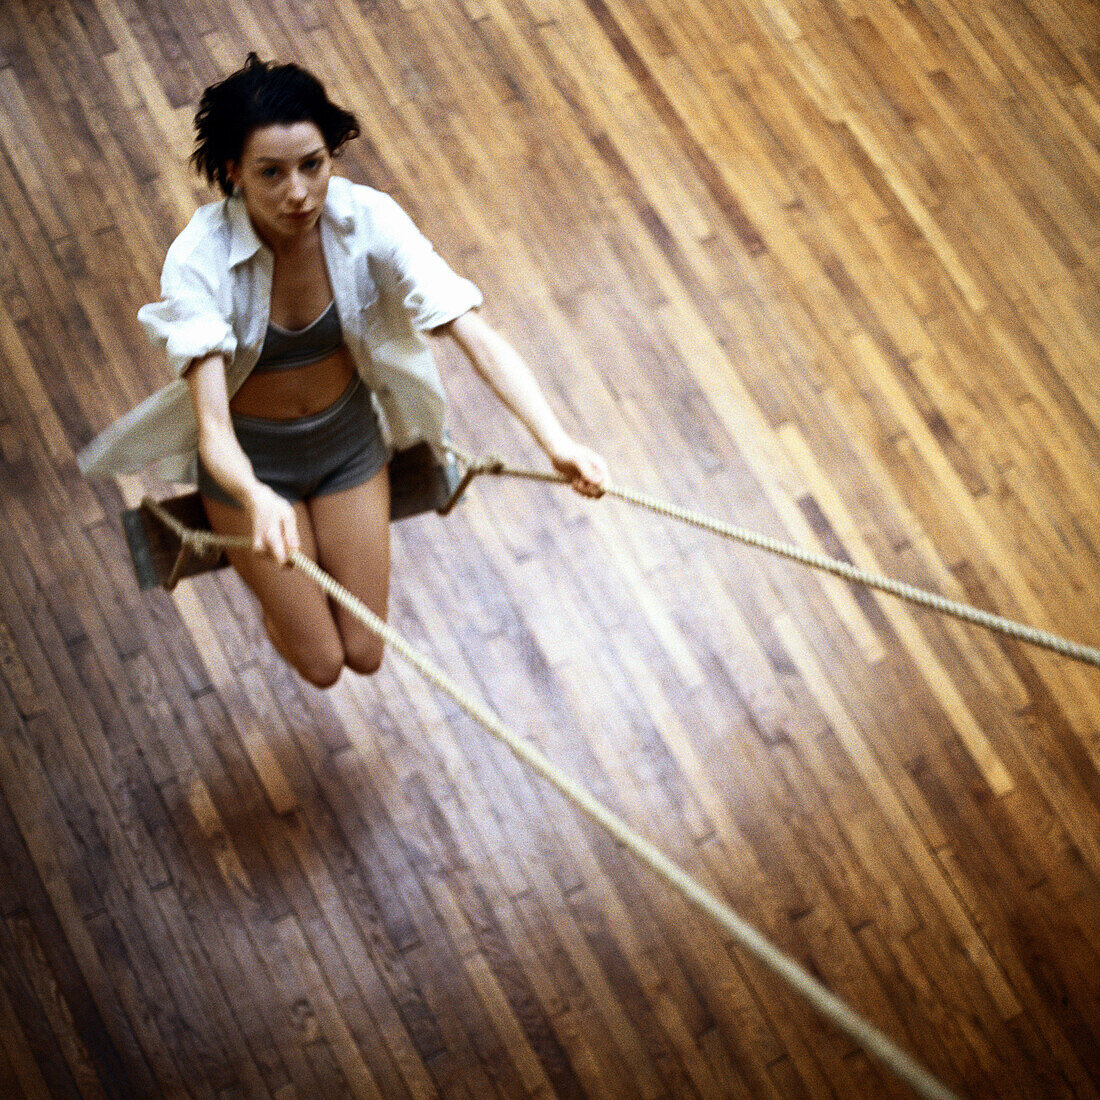 Young woman on swing, indoors, high angle view